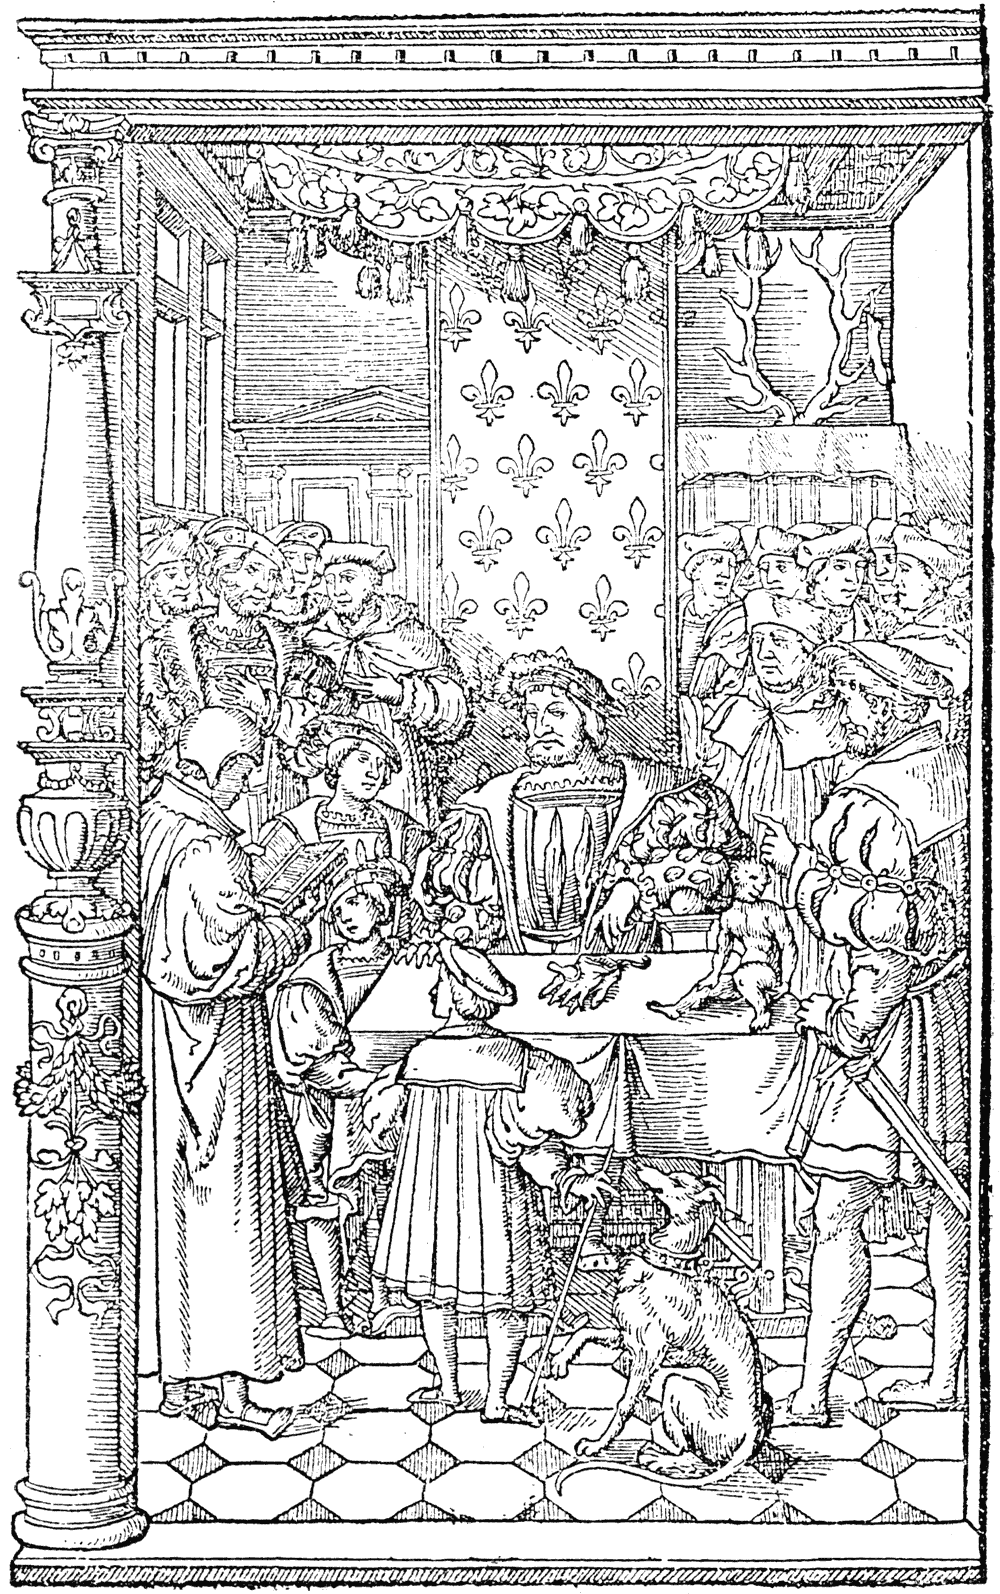 Macault reading to Francis I his translation of Diodorus Siculus. Wood engraving attributed to Geoffroy Tory, 1535.  From Henri Bouchot 'The Printed Book' (1887), page 119, published size in Bouchot, 8cm wide by 12.9cm high.